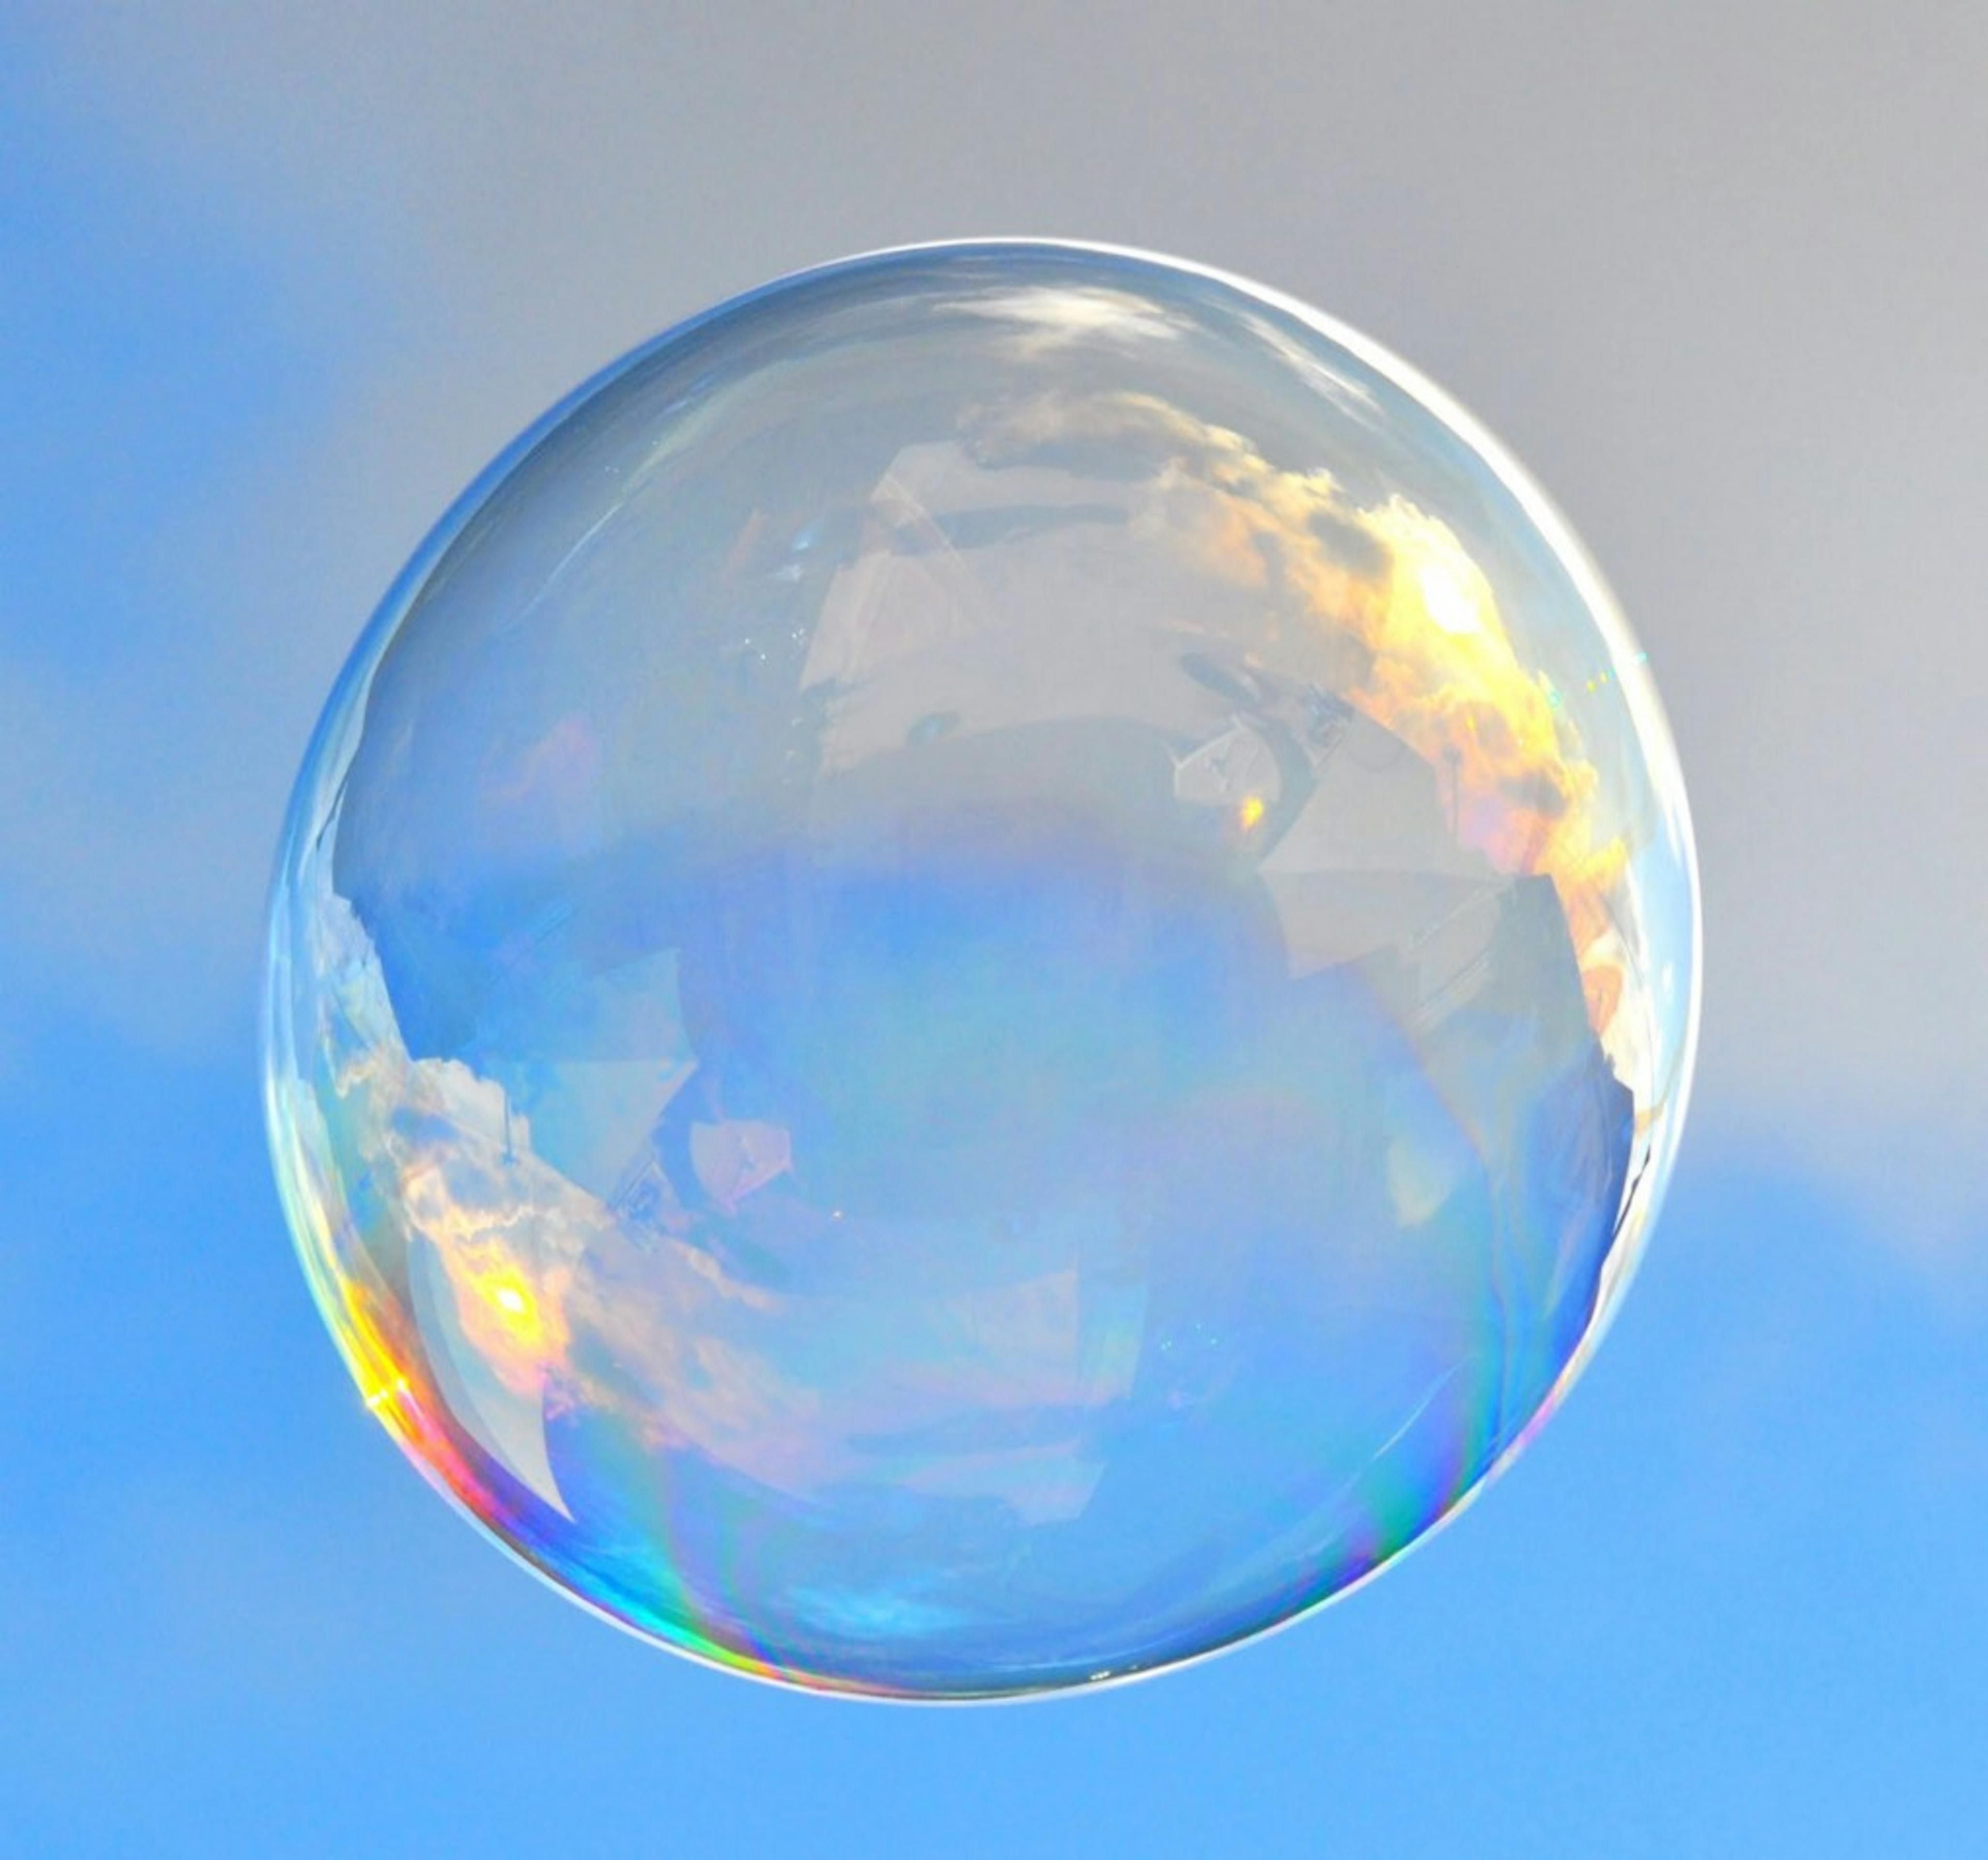 /how-irrational-exuberance-aligned-dot-com-and-crypto-bubbles-d2f14f1d92ab feature image